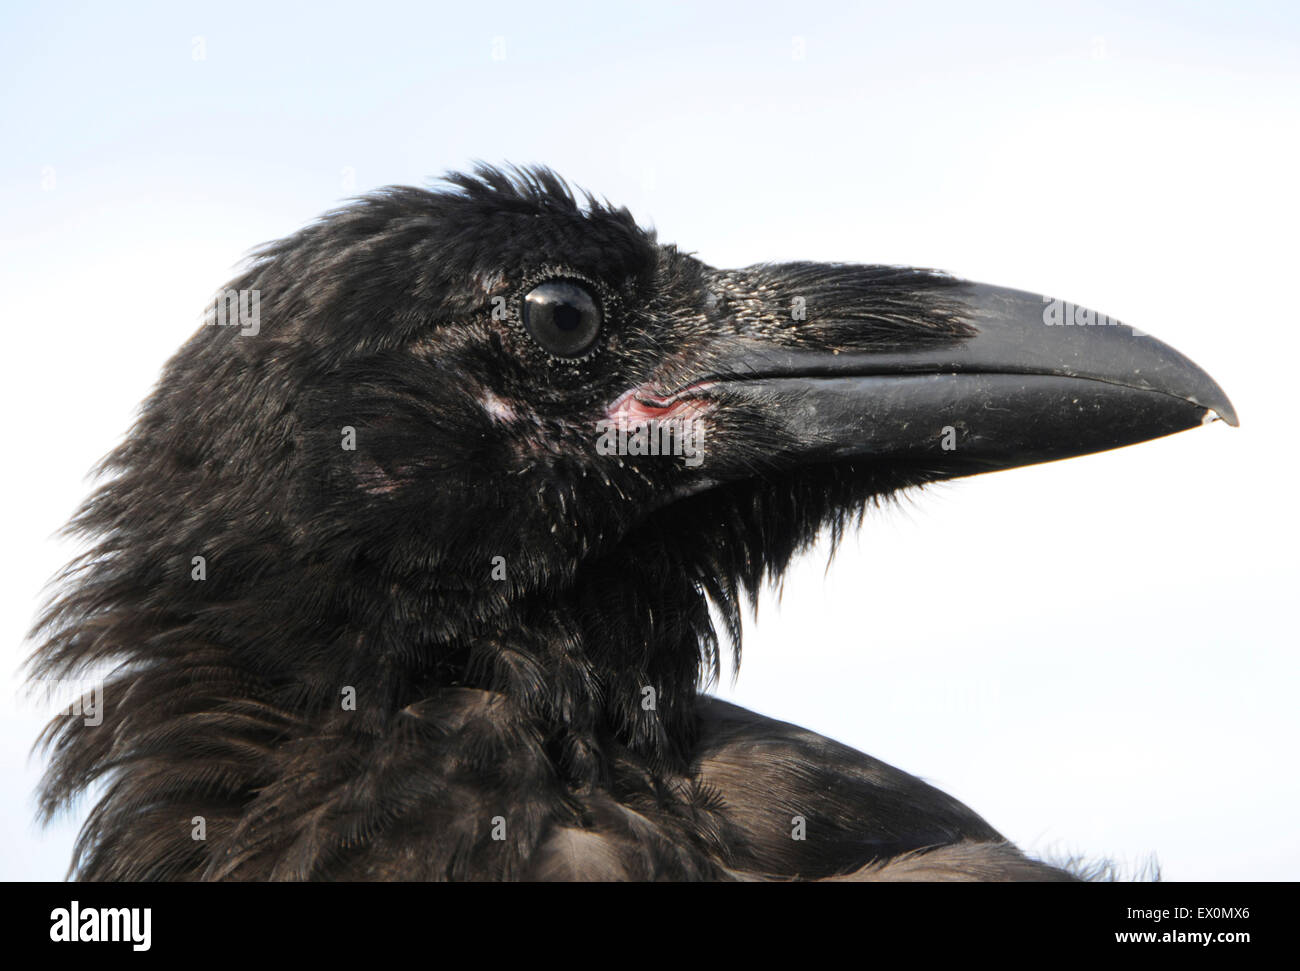 Sussex, UK, 02nd July, 2015. Sussex, UK, 02nd July, 2015. Cooling off in the July heatwave is 'Cronk' - the pet raven (Corvus corax) belonging to David Whitby of Sussex. The young bird is experiencing the hot weather for the first time and enjoys the 'cool-off'. © David Cole/Alamy Live News Credit:  David Cole/Alamy Live News Stock Photo